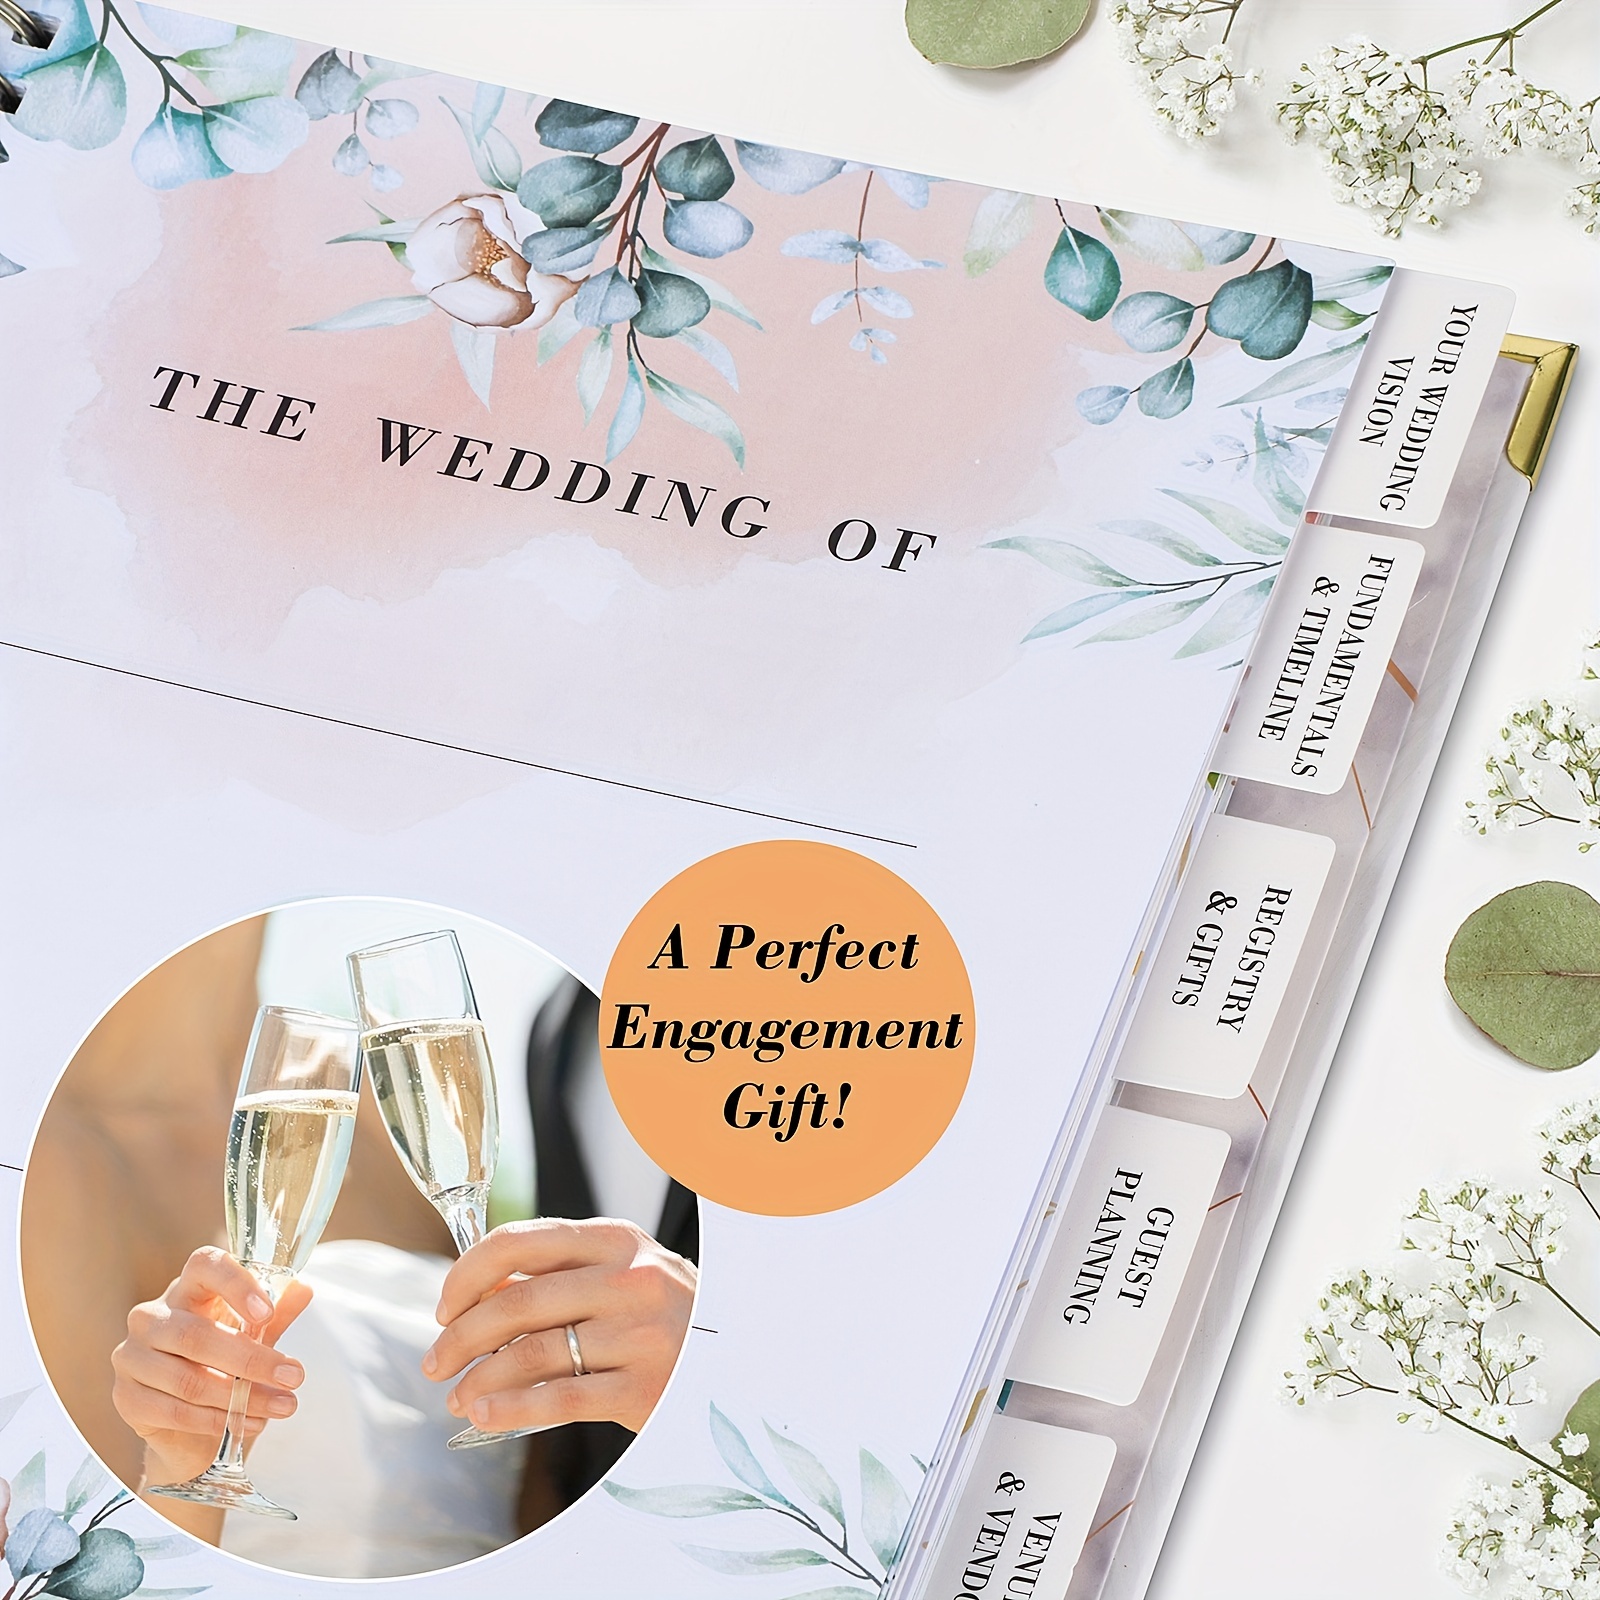  Your Perfect Day Wedding Planner for Bride - Planning Book and  Organizer, Bridal Binder with Countdown Calendar : Office Products